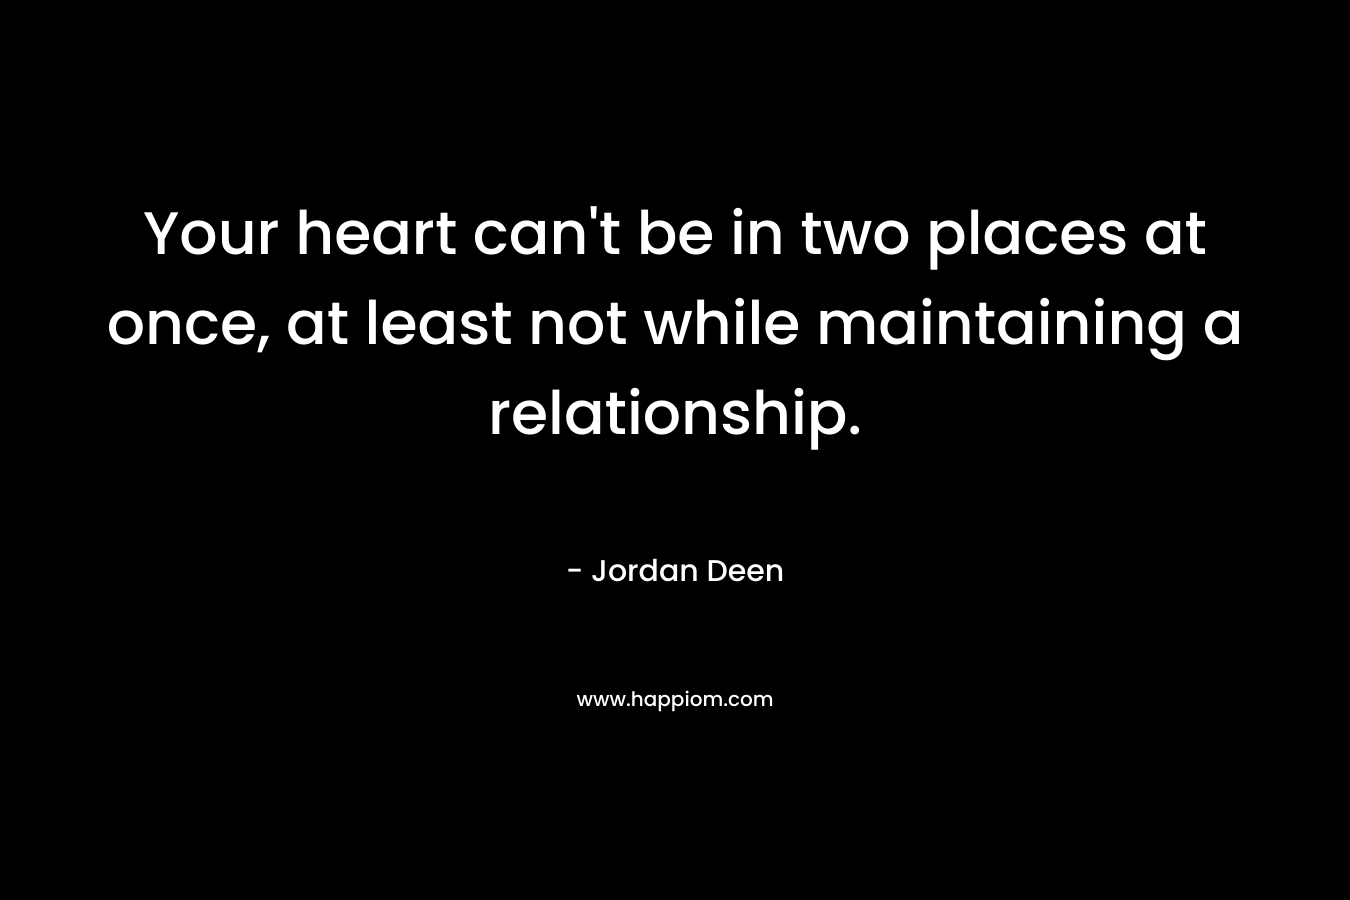 Your heart can't be in two places at once, at least not while maintaining a relationship.